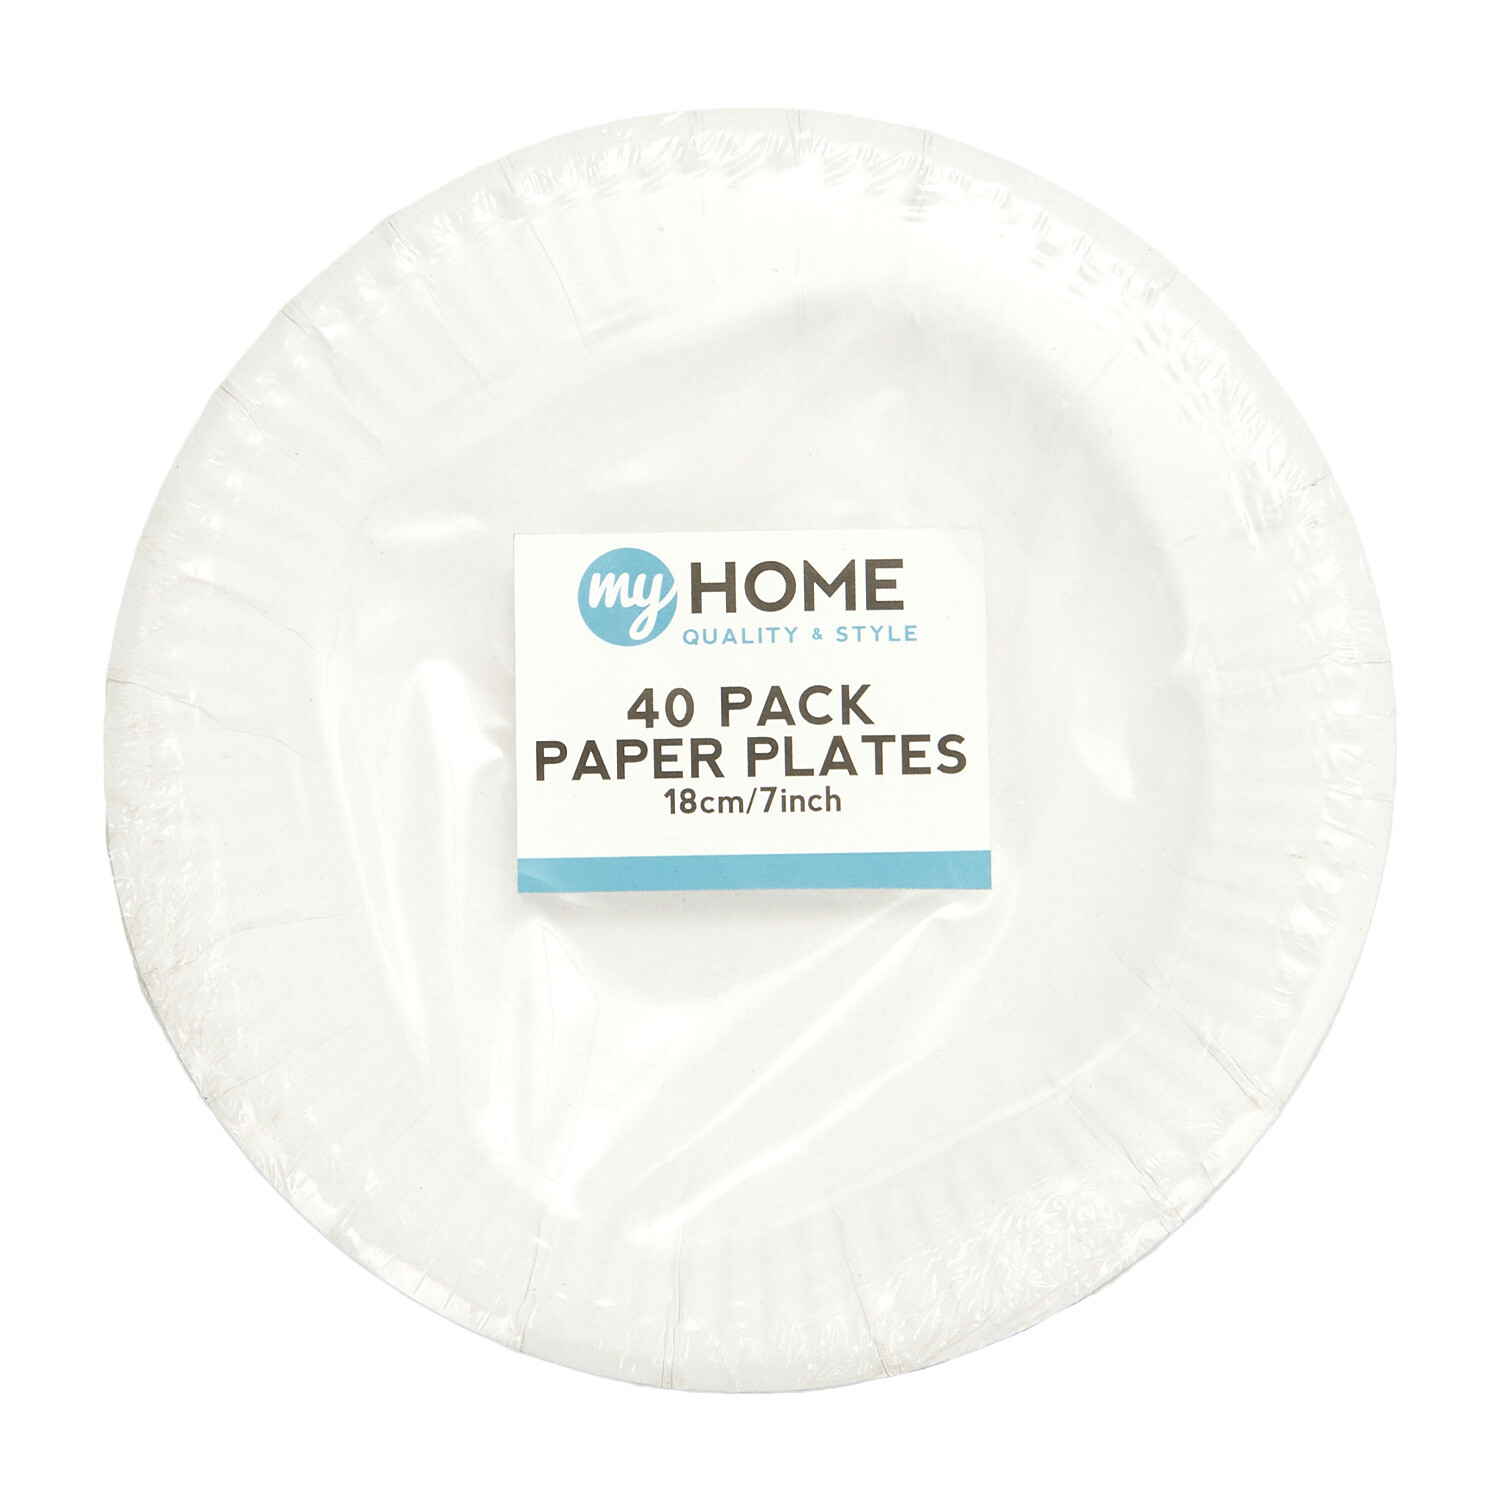 Pack of MyHome Paper Plates - White / 40 Image 1